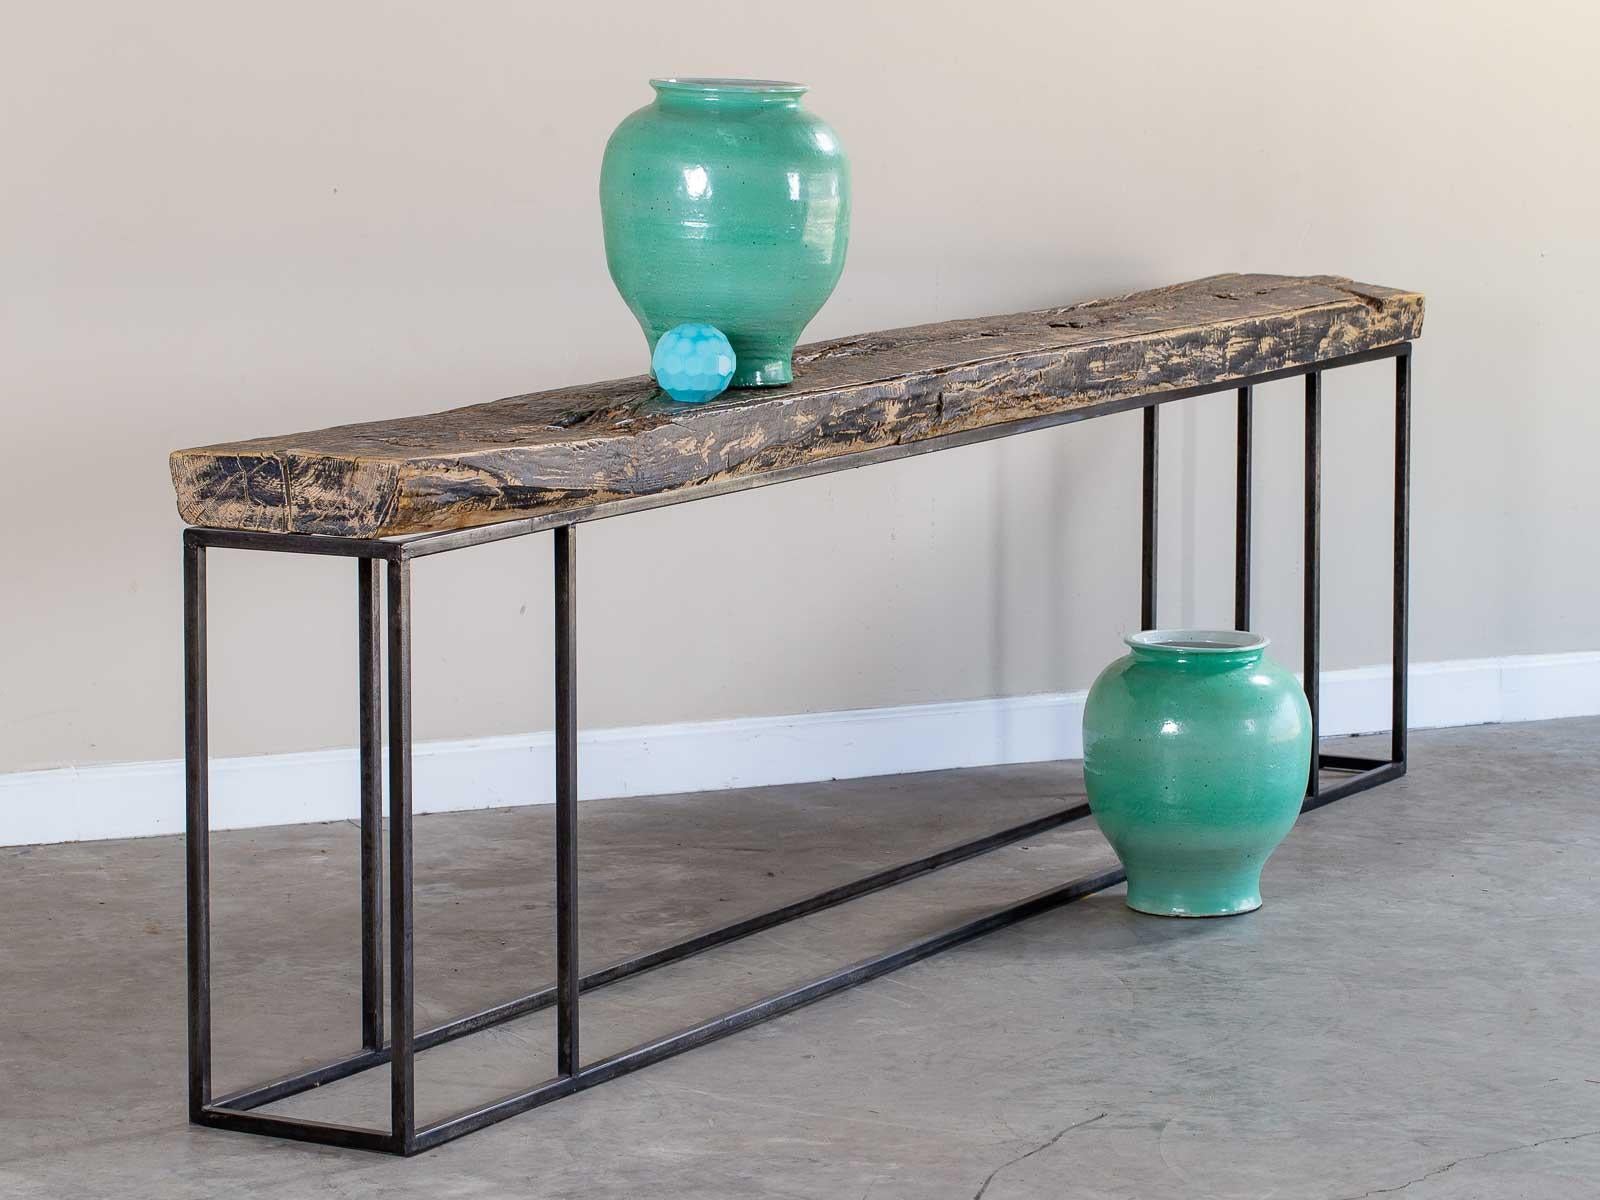 Mid-19th Century Antique Reclaimed Architectural Server Console Table, circa 1850 Organic Modern